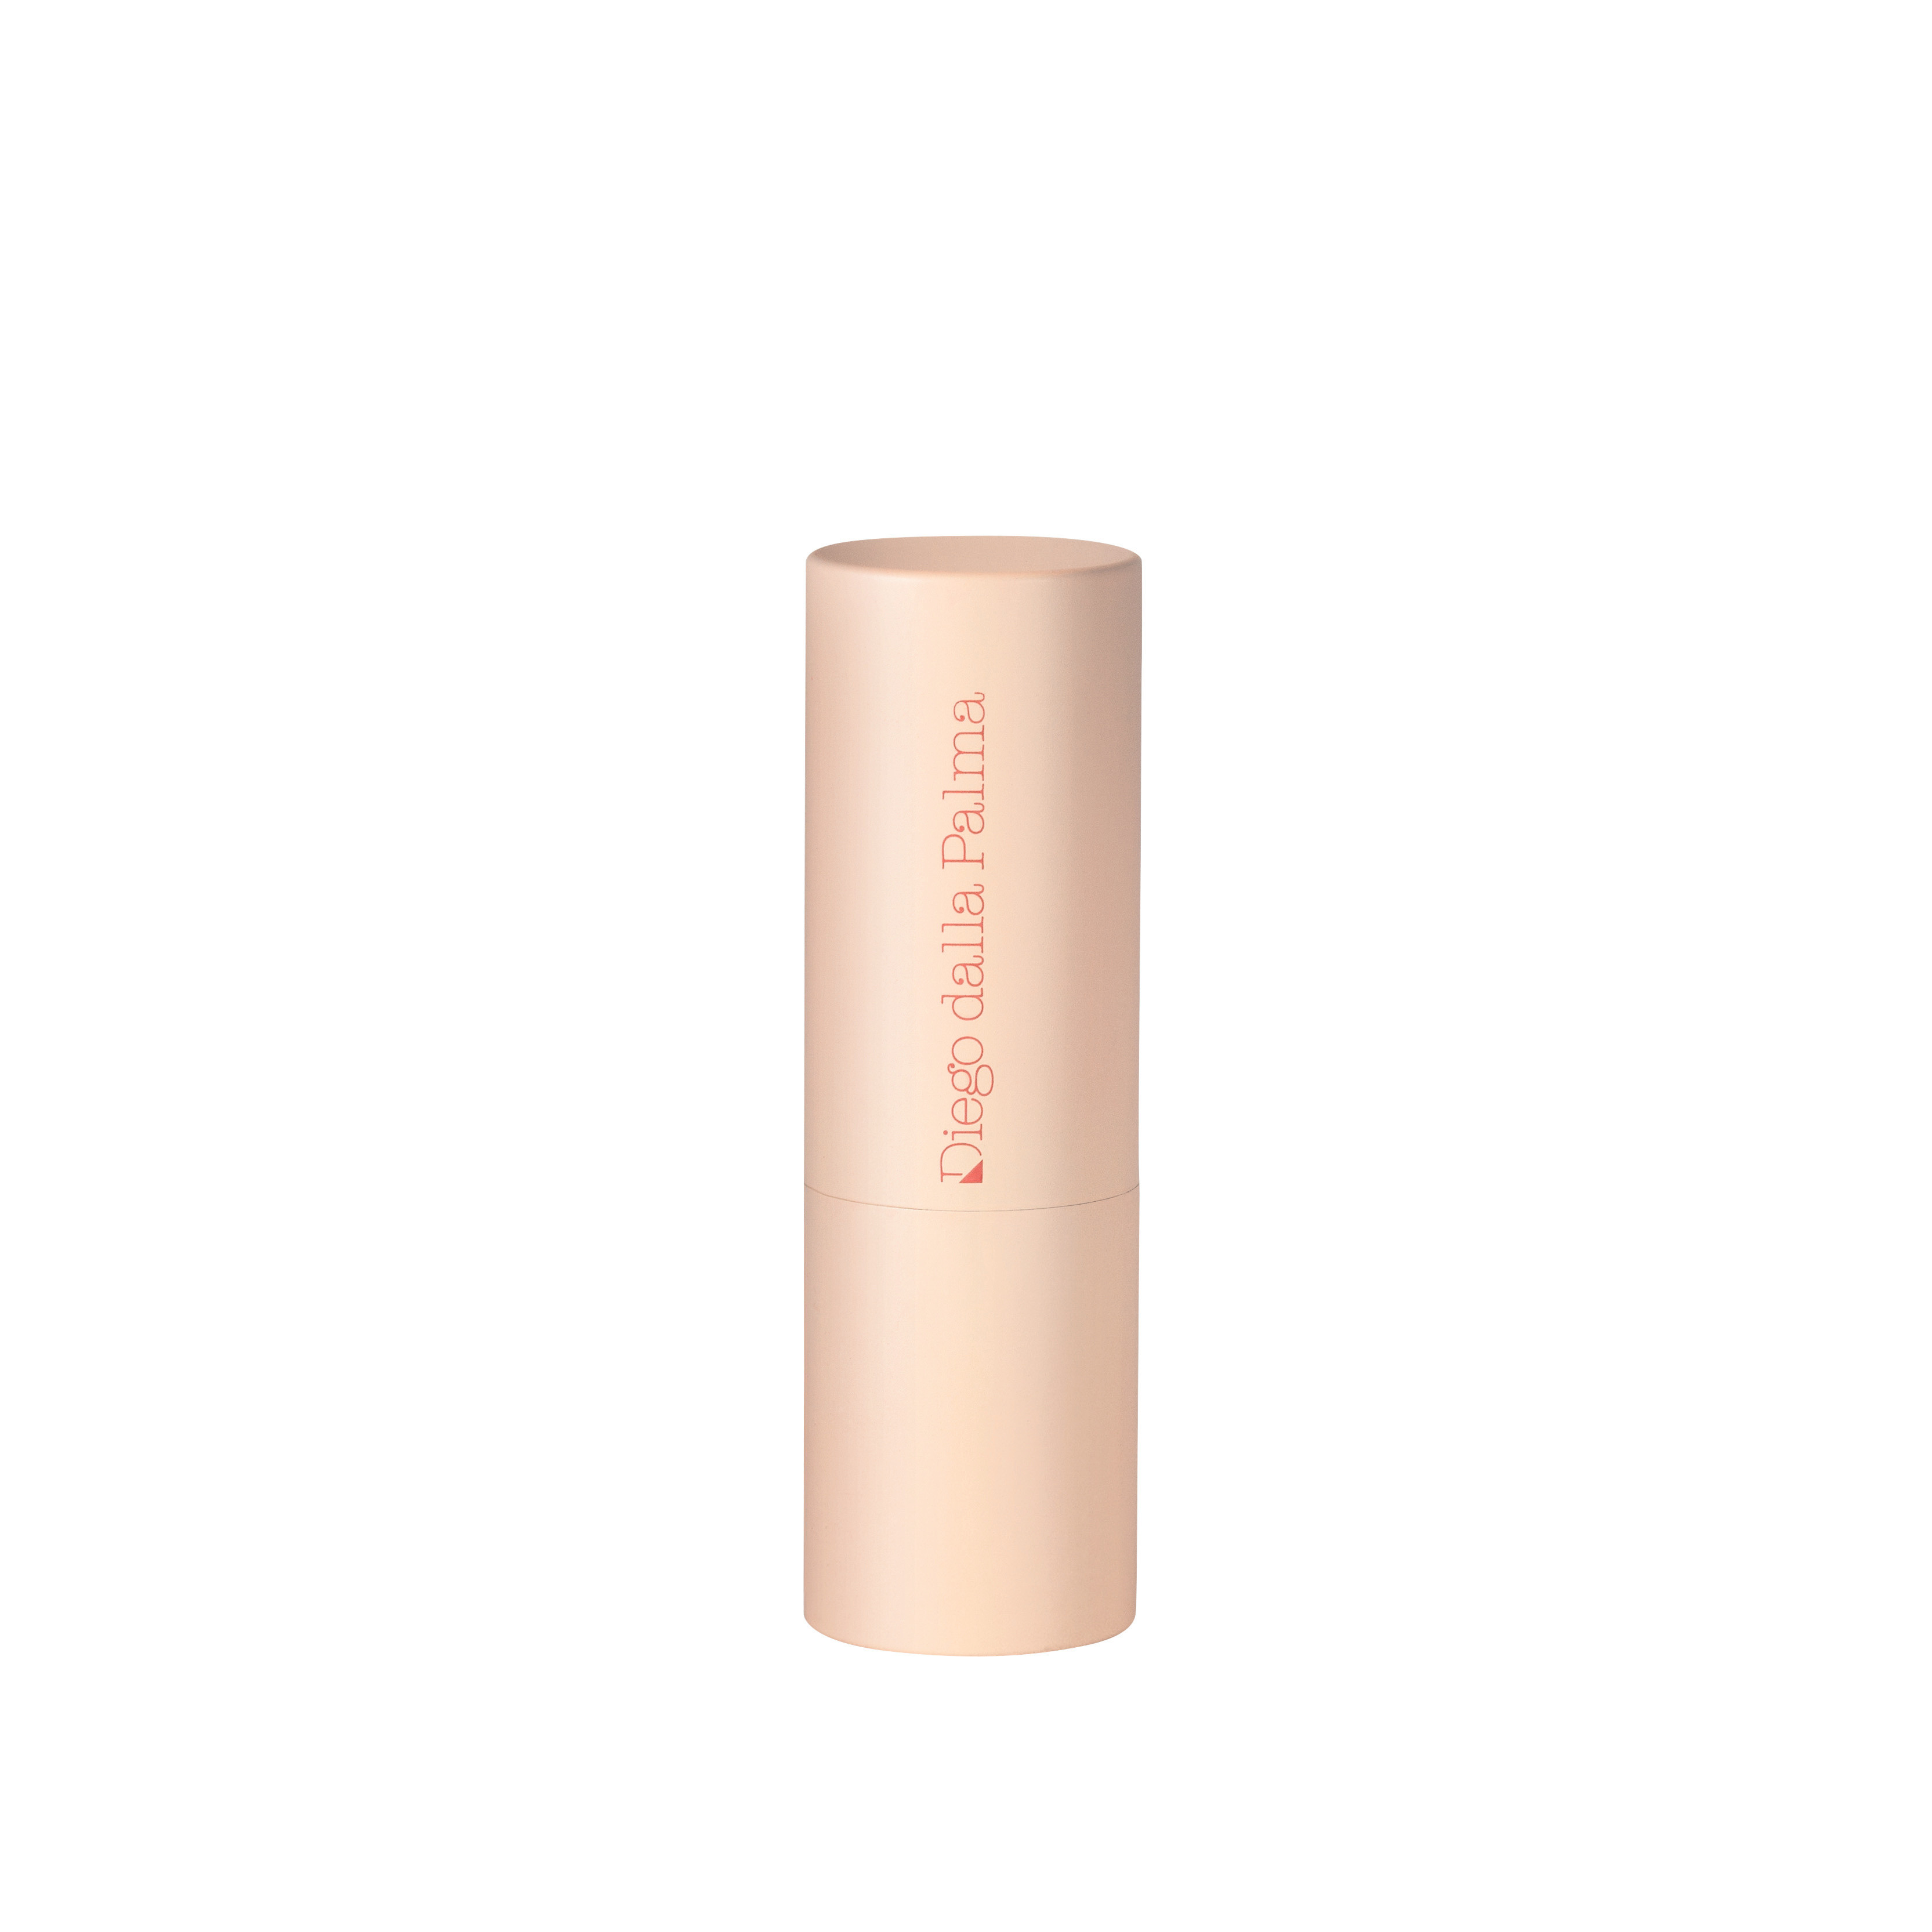 Protect My Lips Balsamo Protettivo Labbra Spf50+ 122 nude, Nude, large image number 1